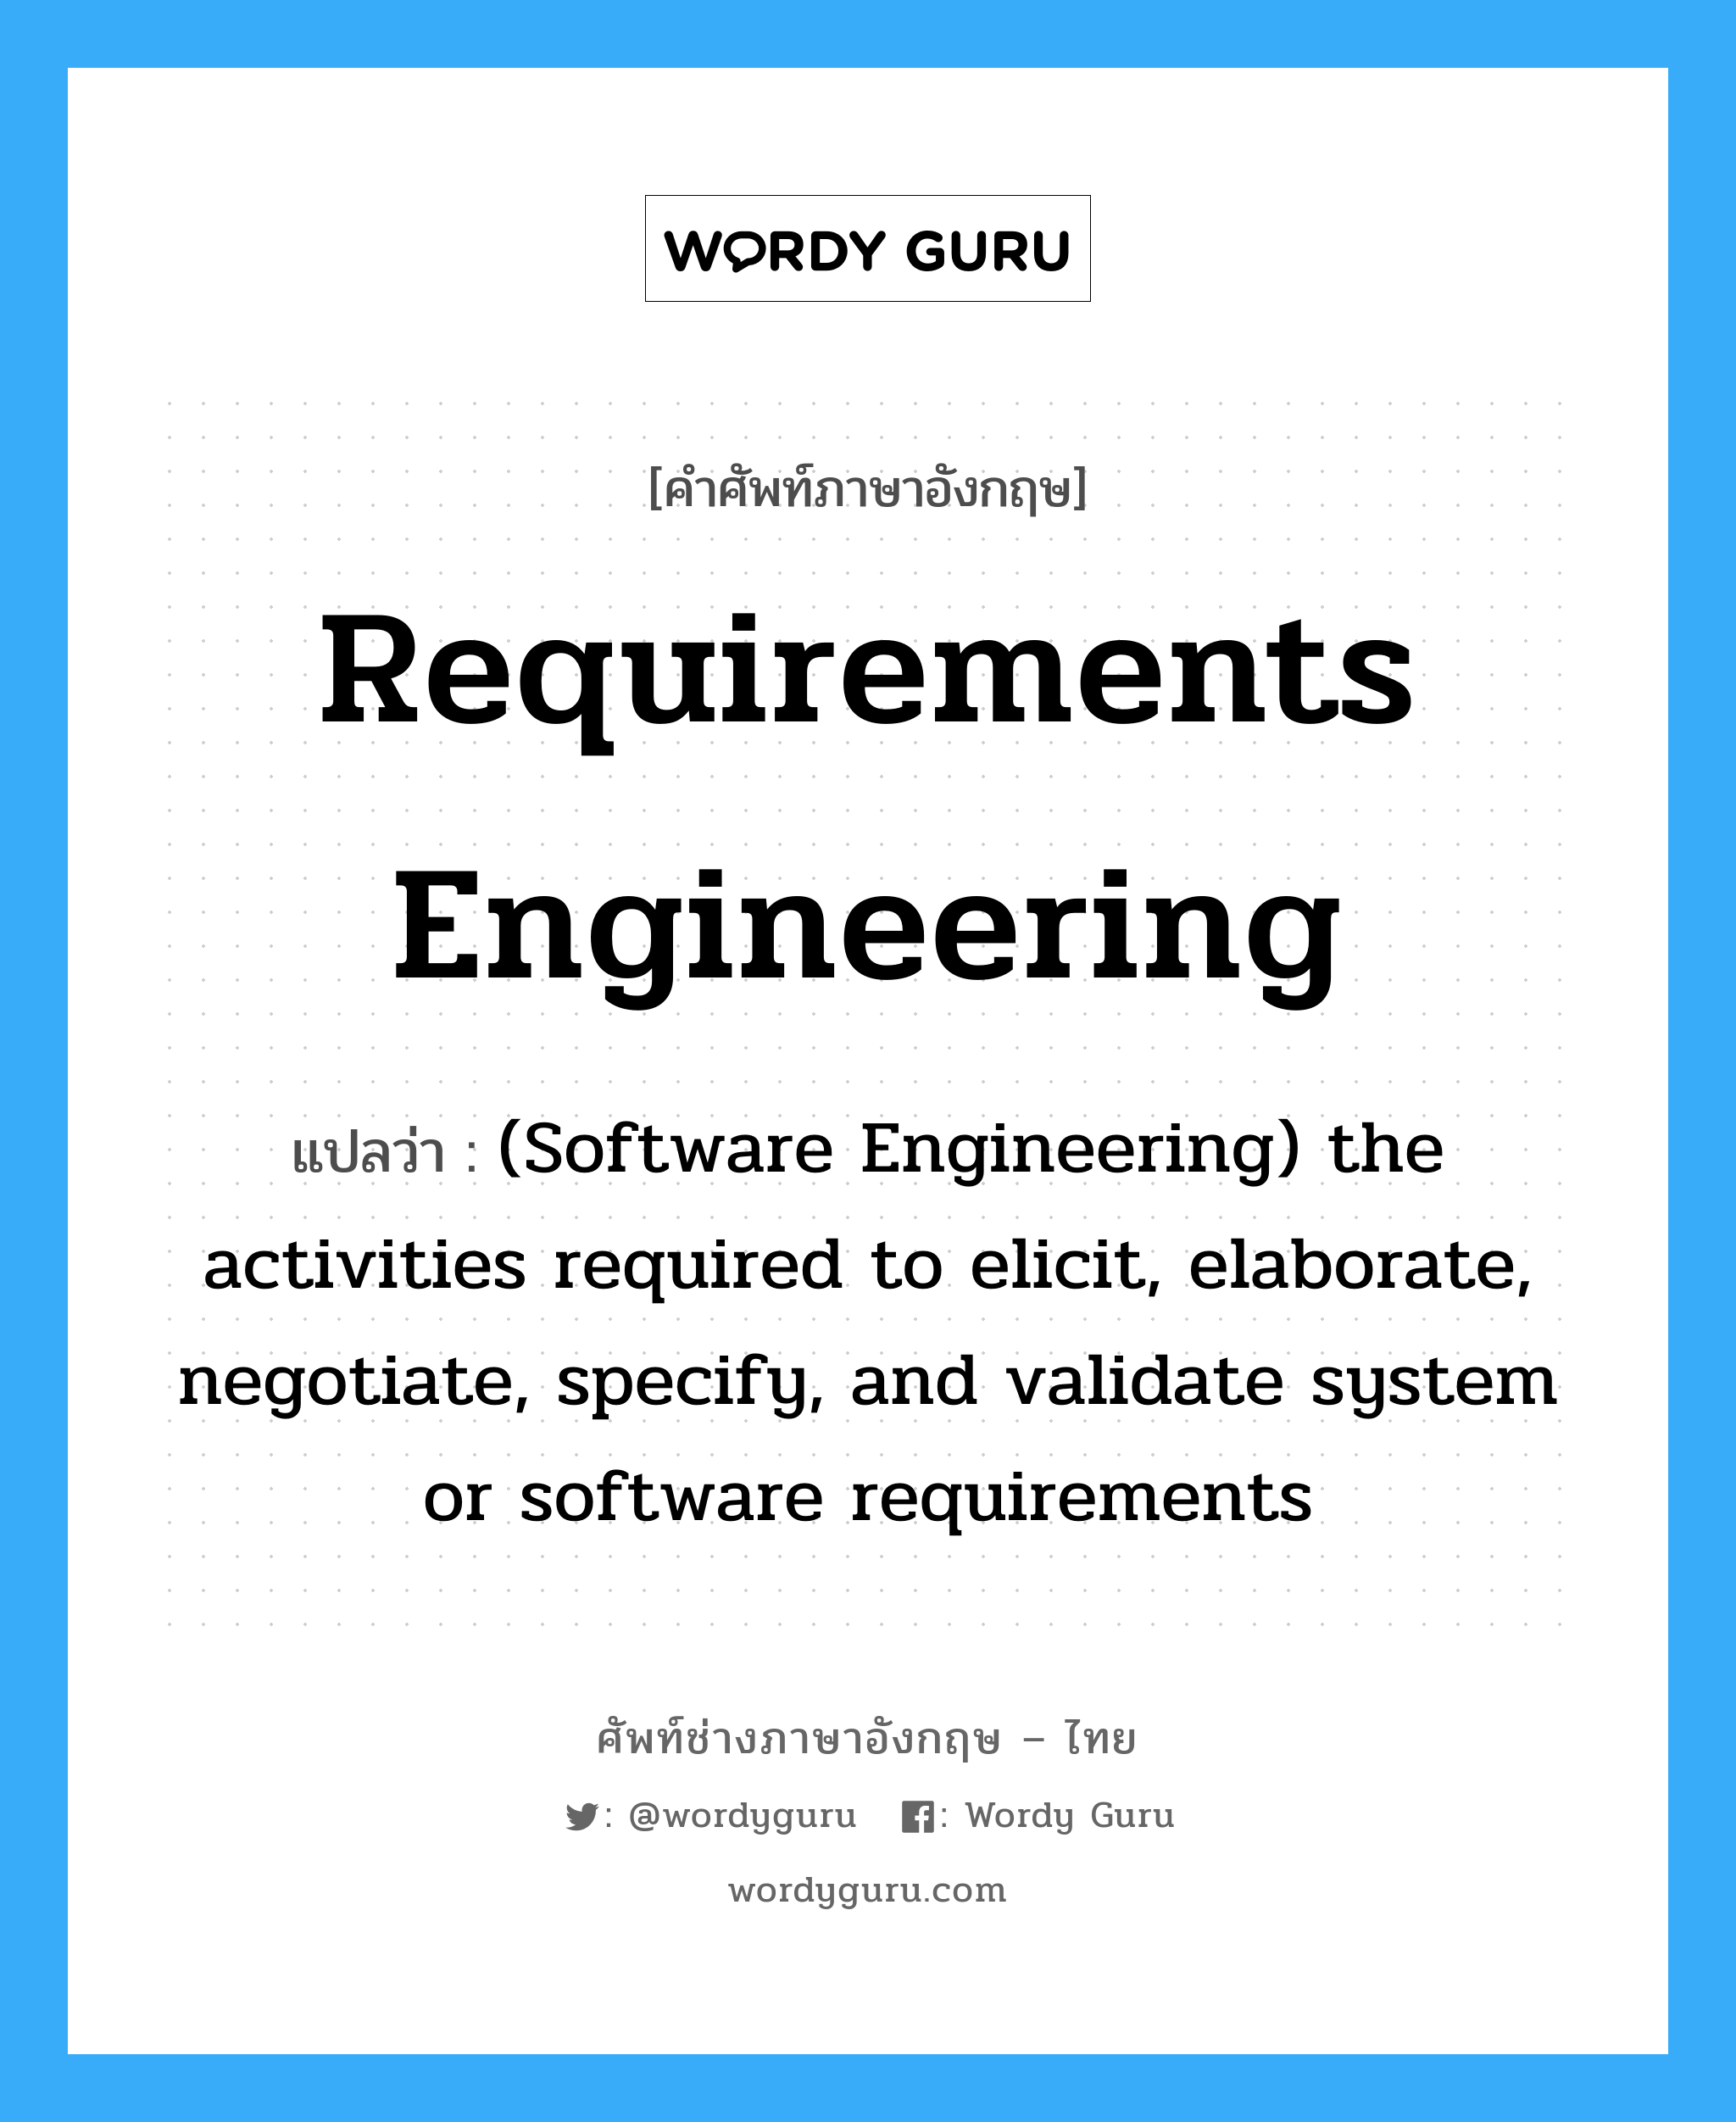 Requirements engineering แปลว่า?, คำศัพท์ช่างภาษาอังกฤษ - ไทย Requirements engineering คำศัพท์ภาษาอังกฤษ Requirements engineering แปลว่า (Software Engineering) the activities required to elicit, elaborate, negotiate, specify, and validate system or software requirements